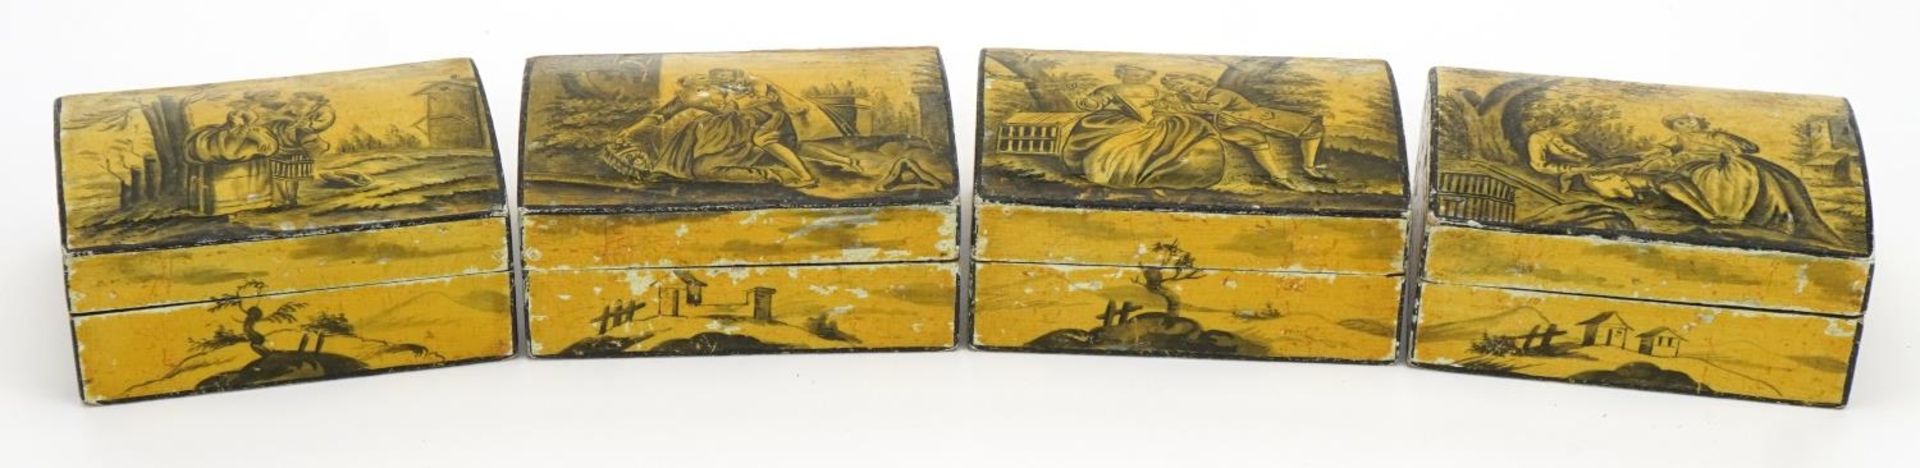 Four 19th century continental lacquered dome top boxes hand painted with classical figures in